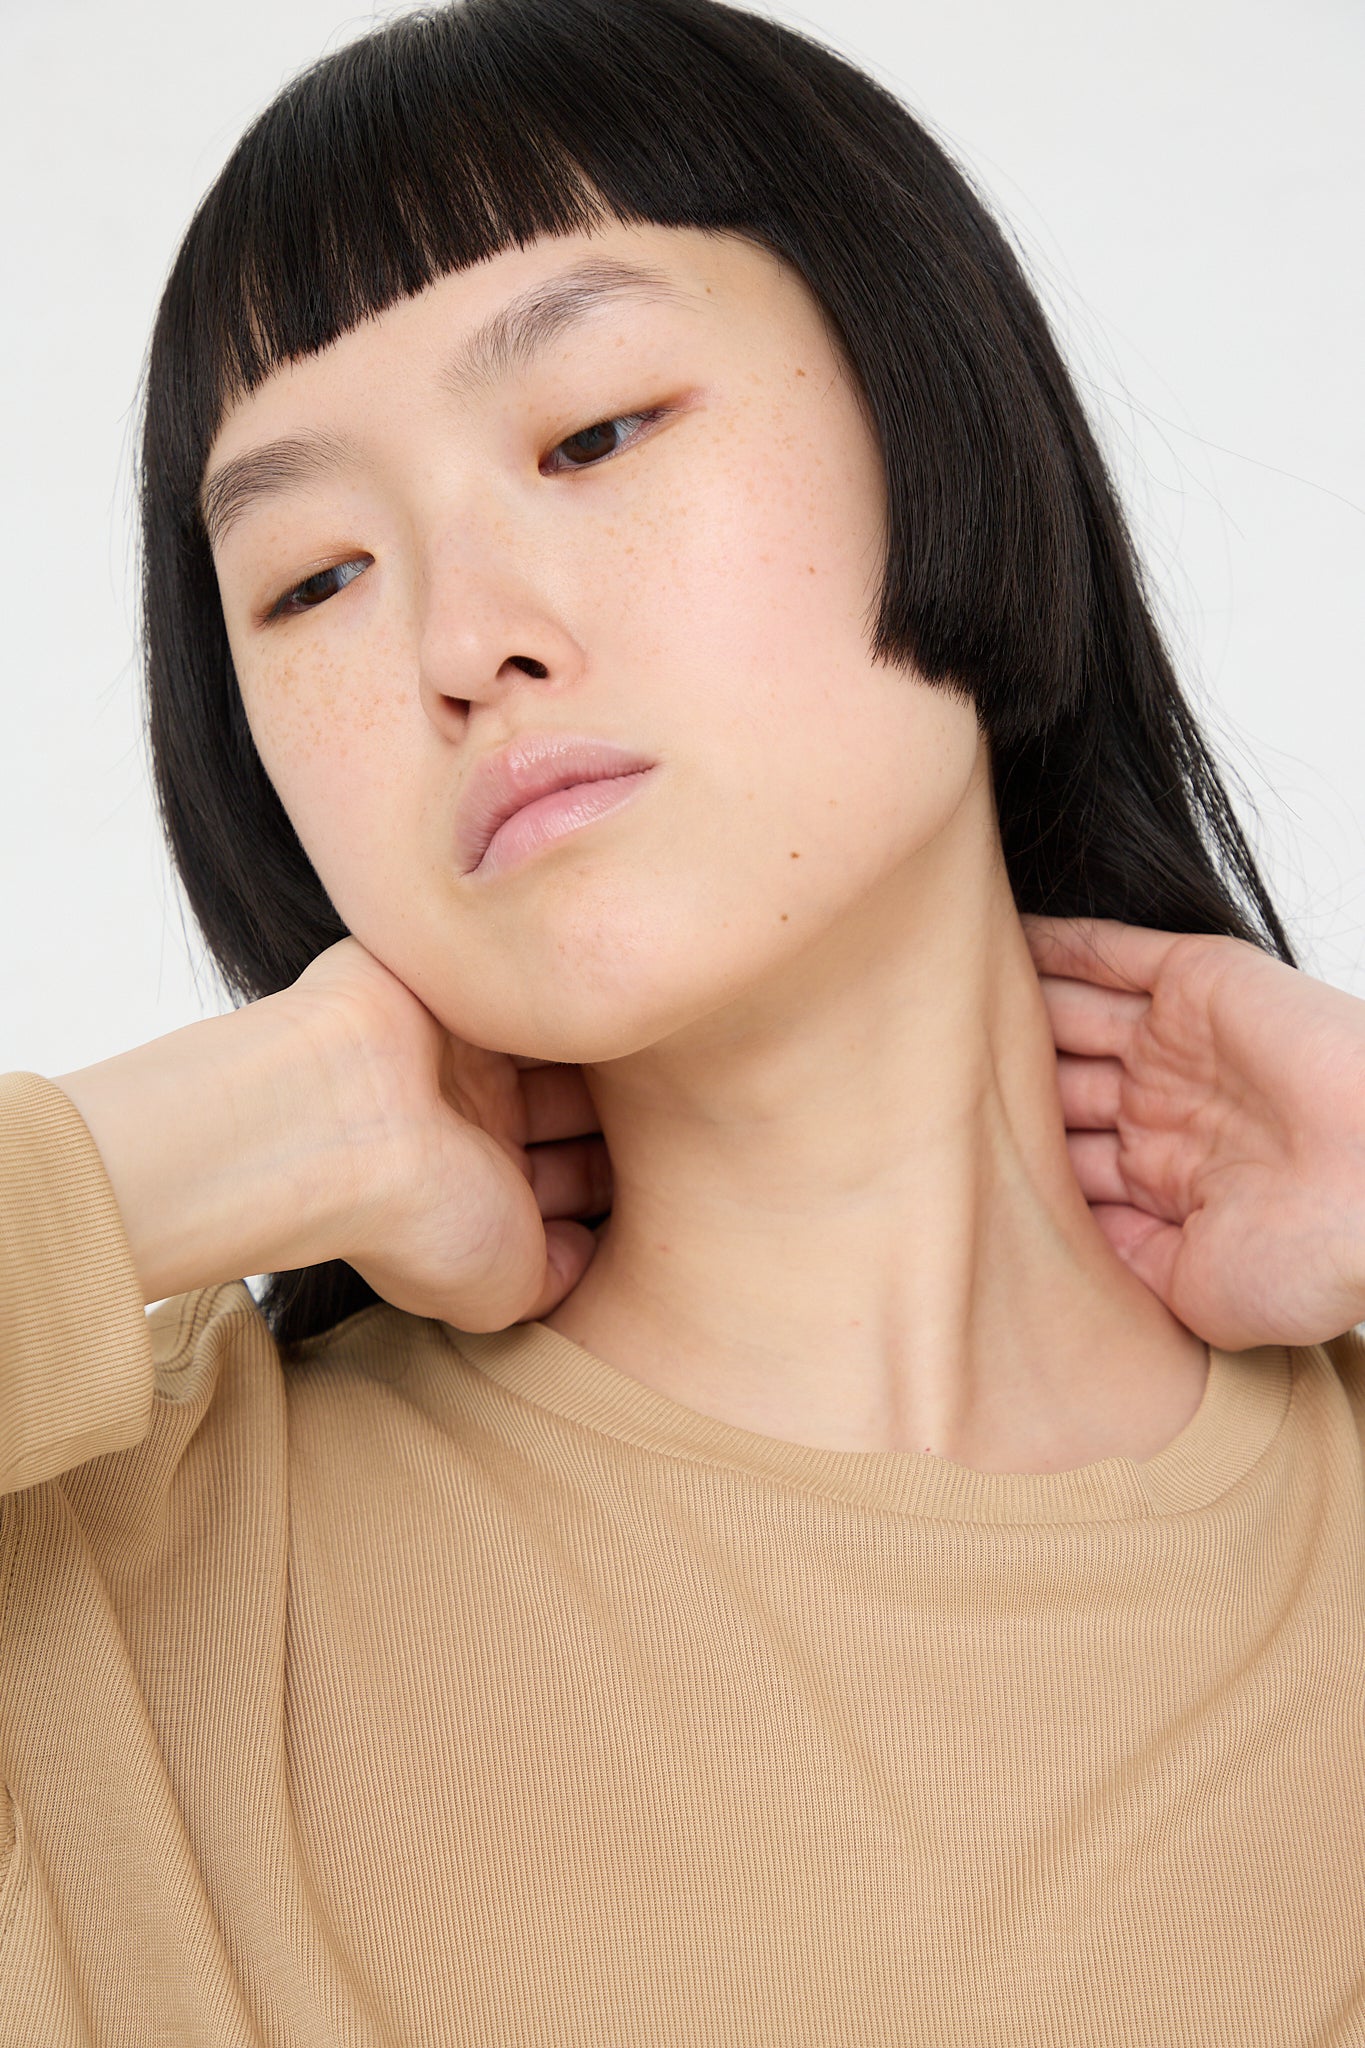 A woman wearing a Studio Nicholson Simmons Long Sleeve Top in Sand with dropped shoulders and black hair.